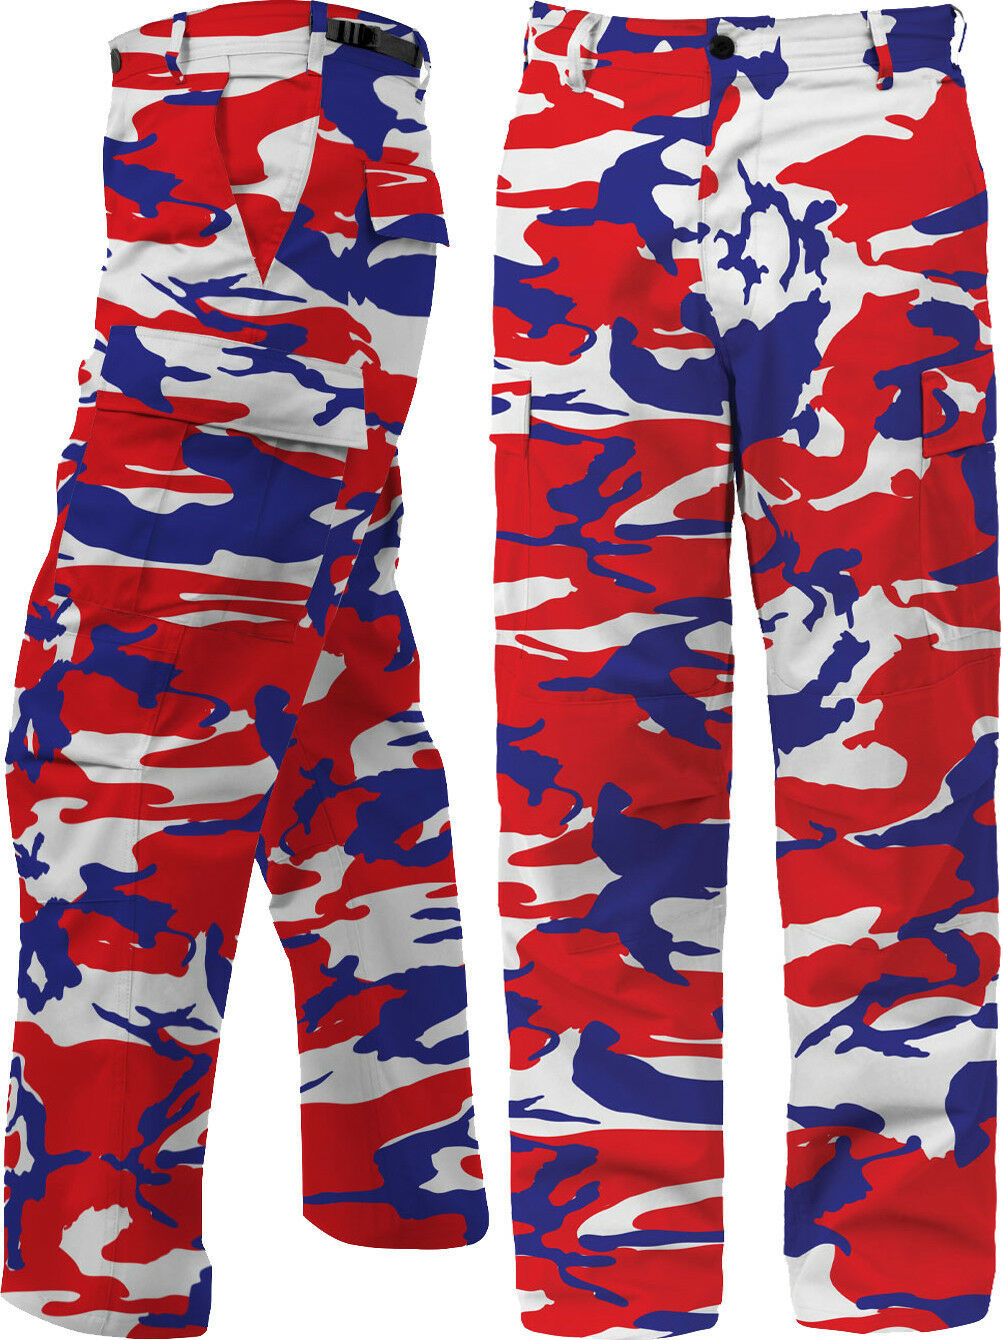 Red White Blue Camouflage BDU Pants Cargo Fatigues USA Patriotic Camo ...